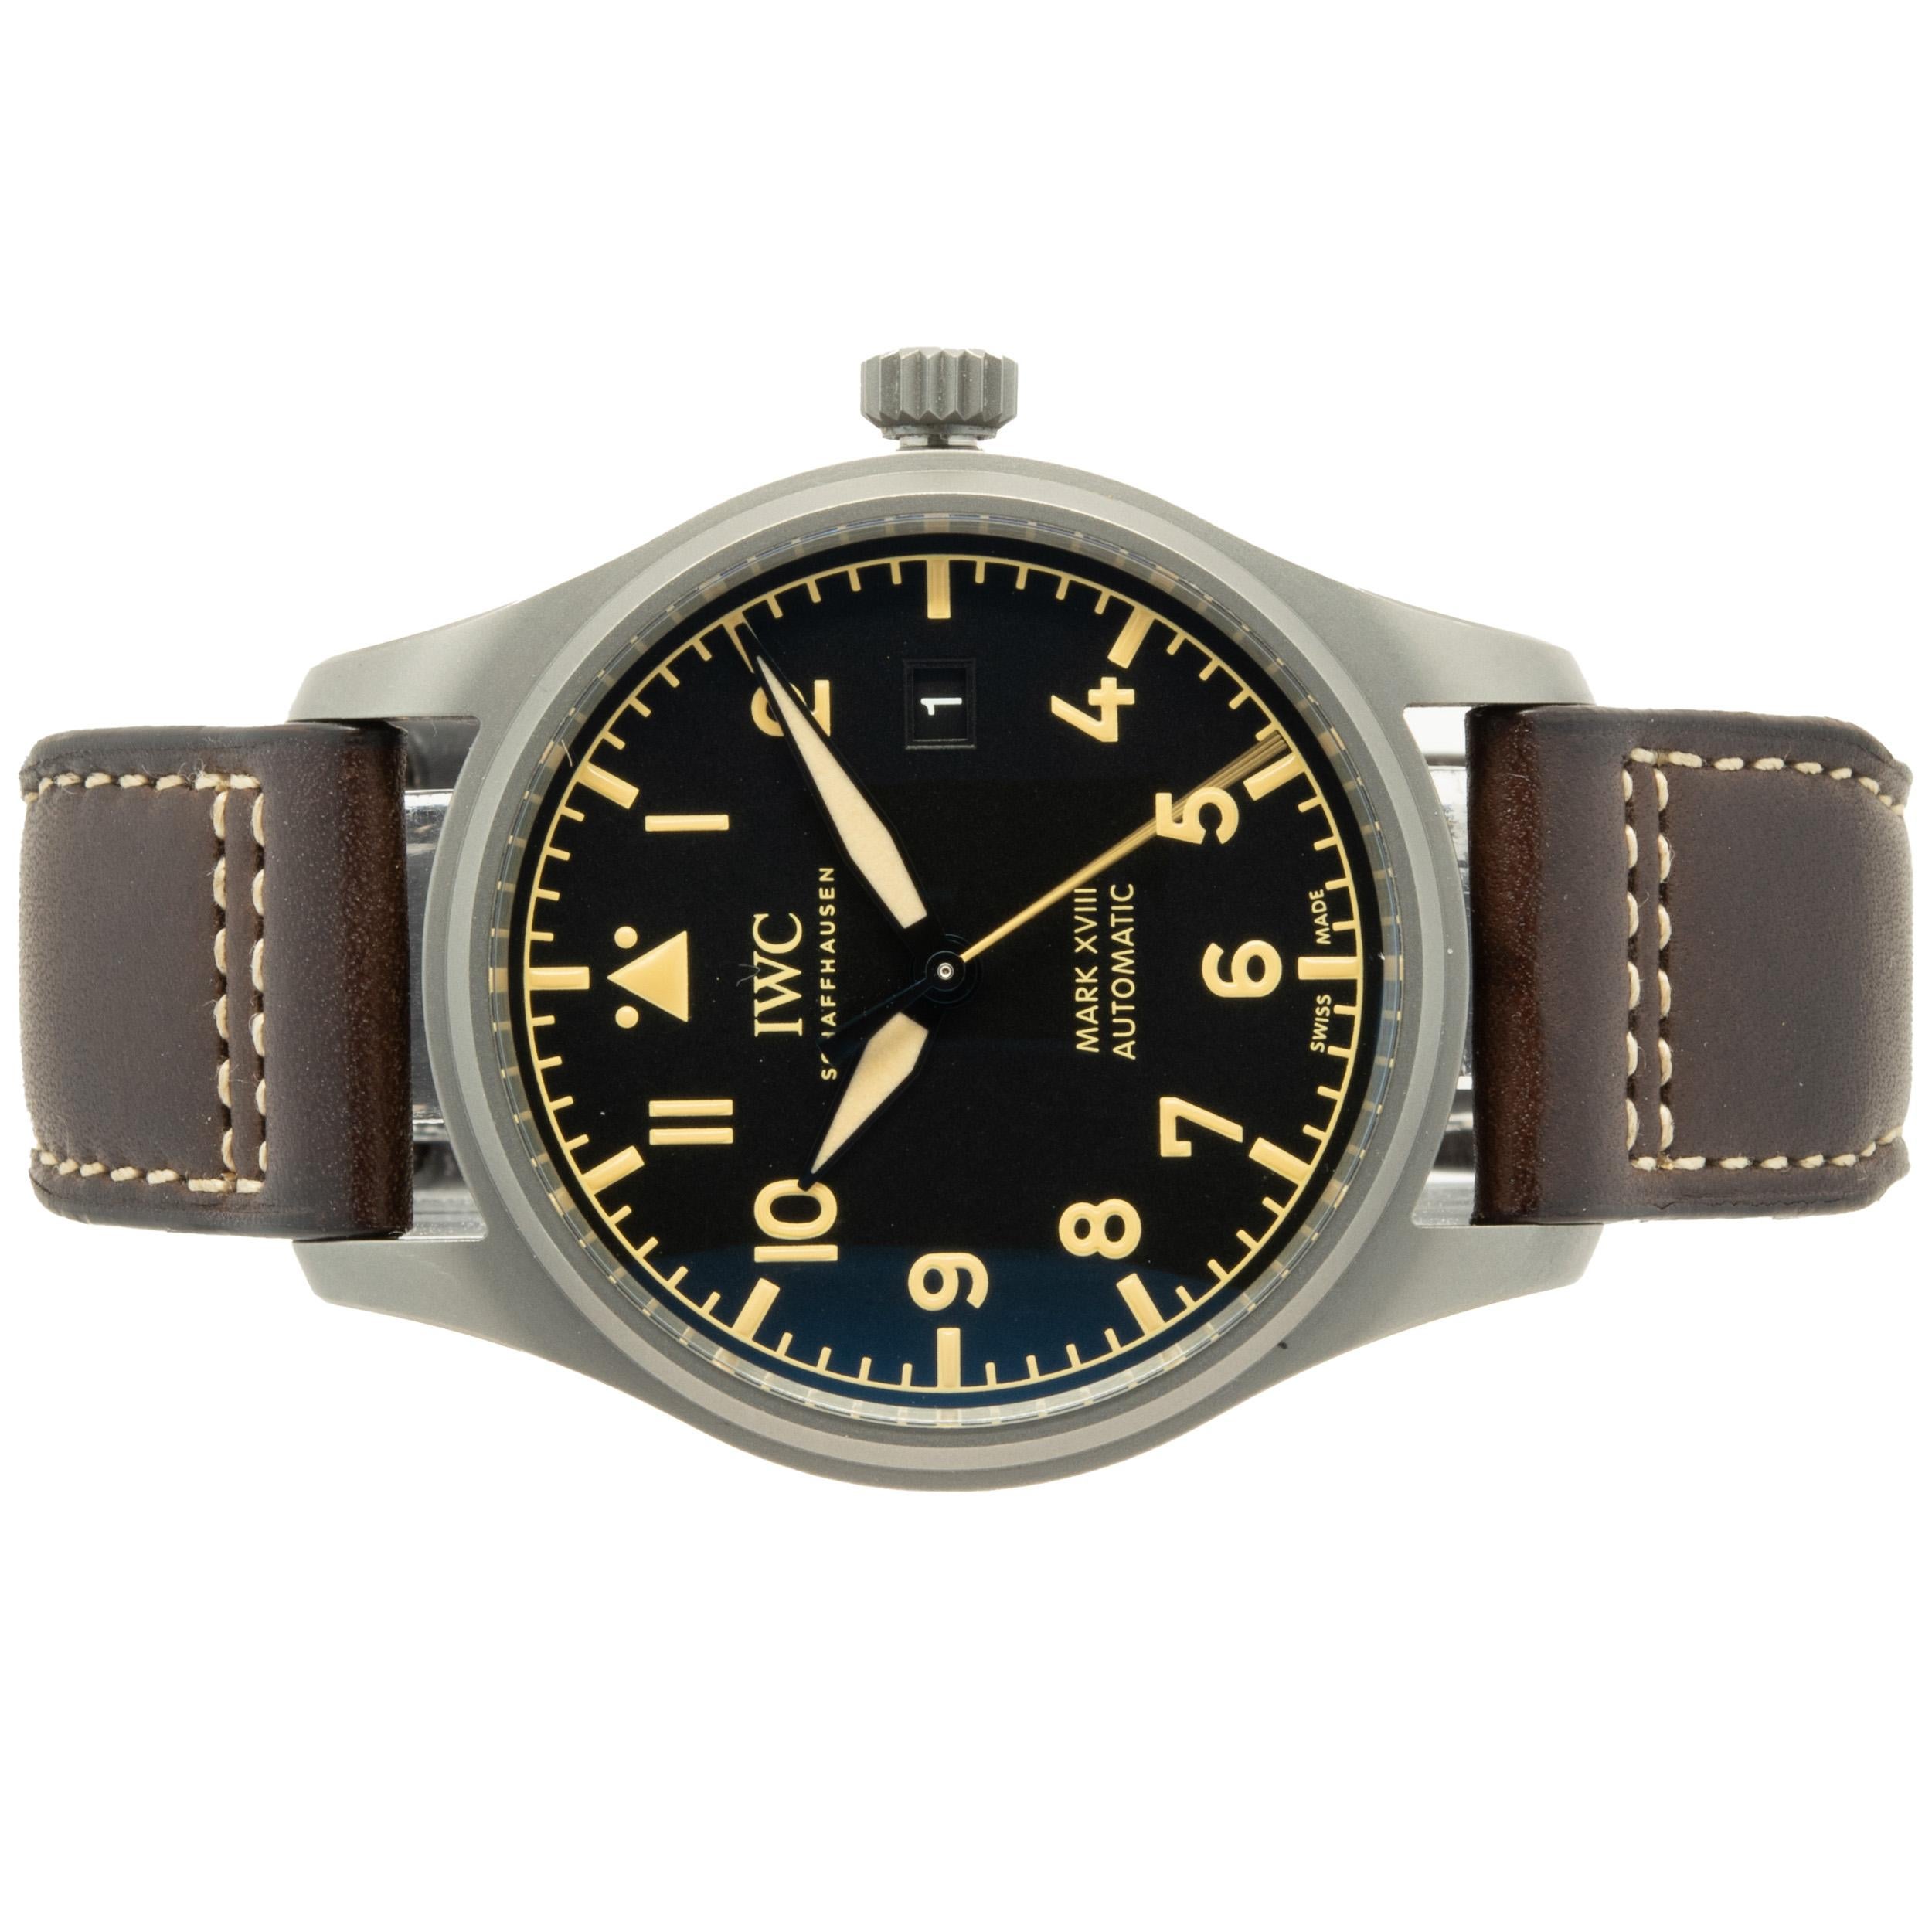 Brand: IWC
Movement: automatic
Function: hours, minutes, seconds, date
Case: 40mm round case, sapphire crystal, push/pull crown, smooth bezel
Band: brown leather strap, buckle
Dial: black arabic
Reference #: IW327006
Serial #: 5650XXX
Complete with